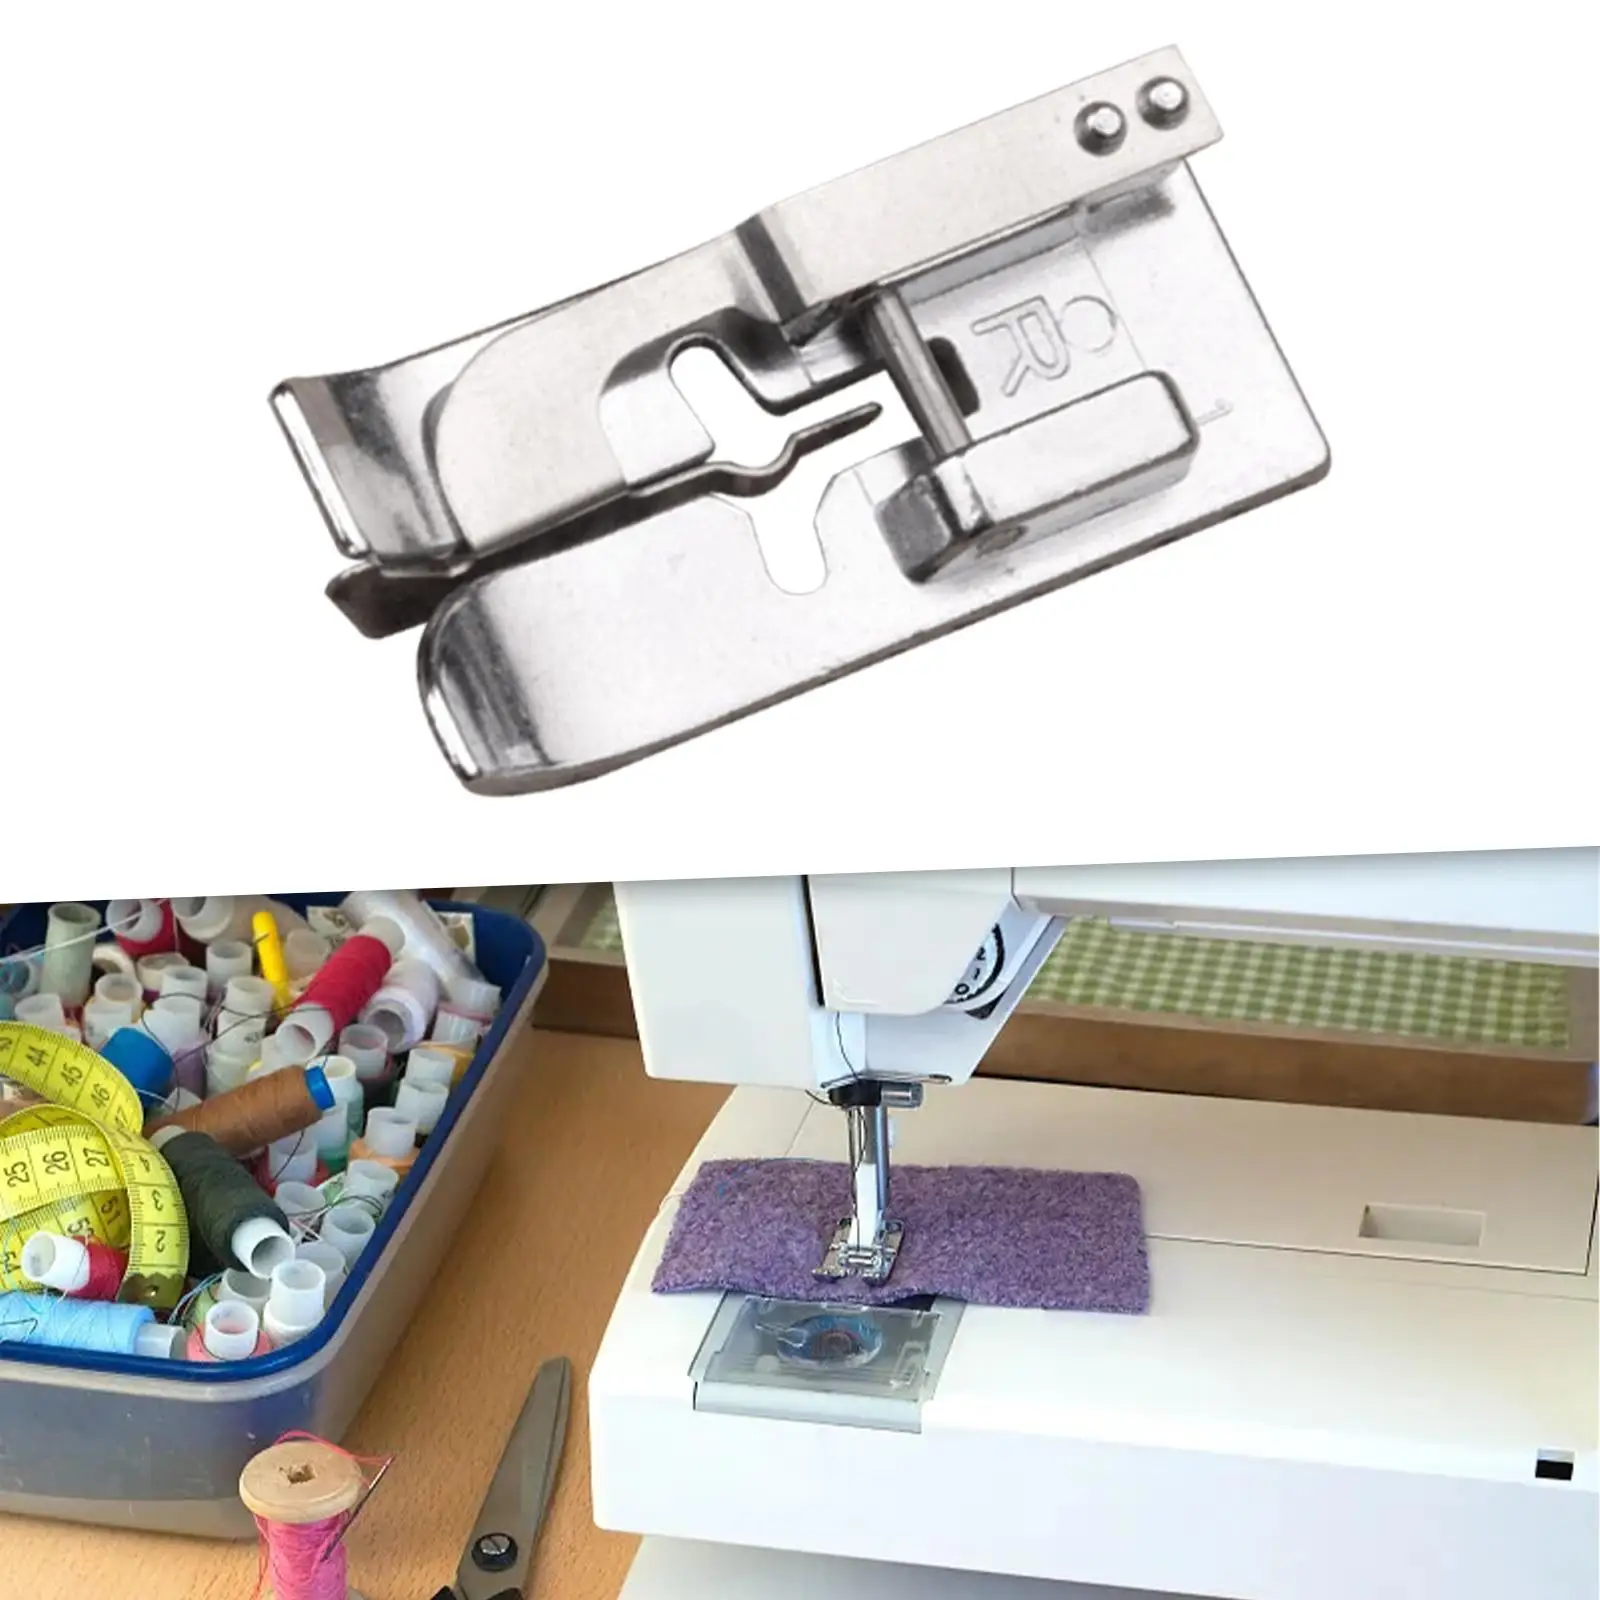 Presser Foot for Sewing Machine Durable Stitch Hem Presser Foot for DIY Arts Crafts Leather Crafts Edge Stitching Clothes